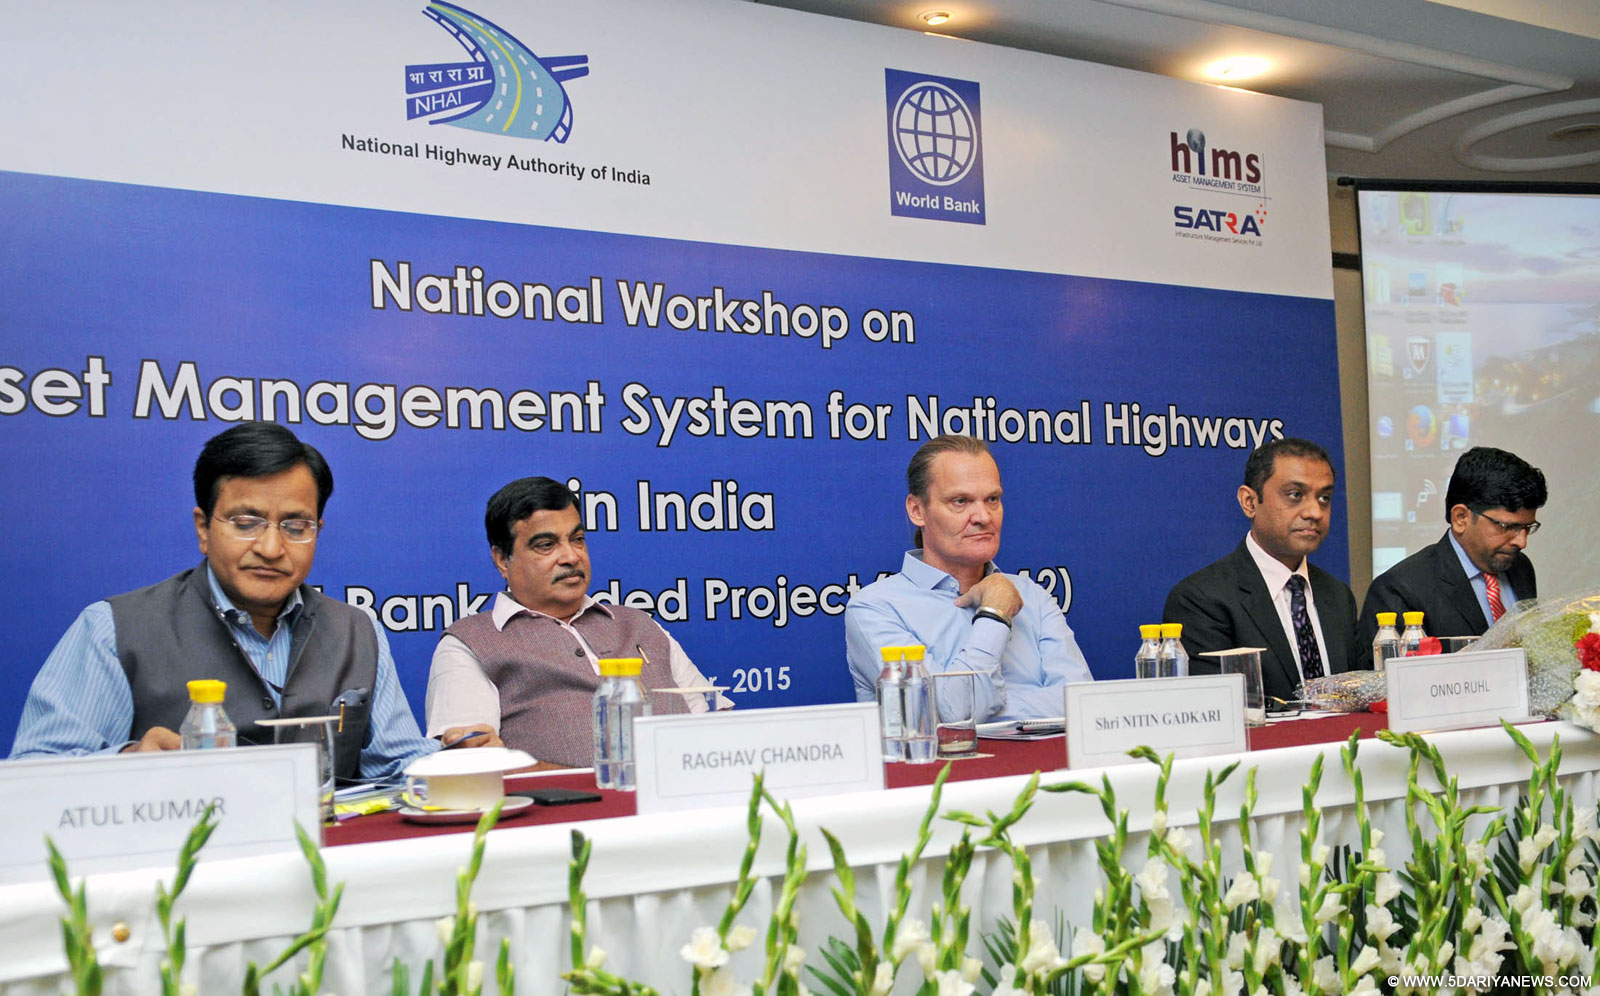 The Union Minister for Road Transport & Highways and Shipping, Shri Nitin Gadkari at the inauguration of the National Workshop on Road Asset Management for National Highways under World Bank funded Project (WBTA-12 Package), in New Delhi on October 01, 2015.